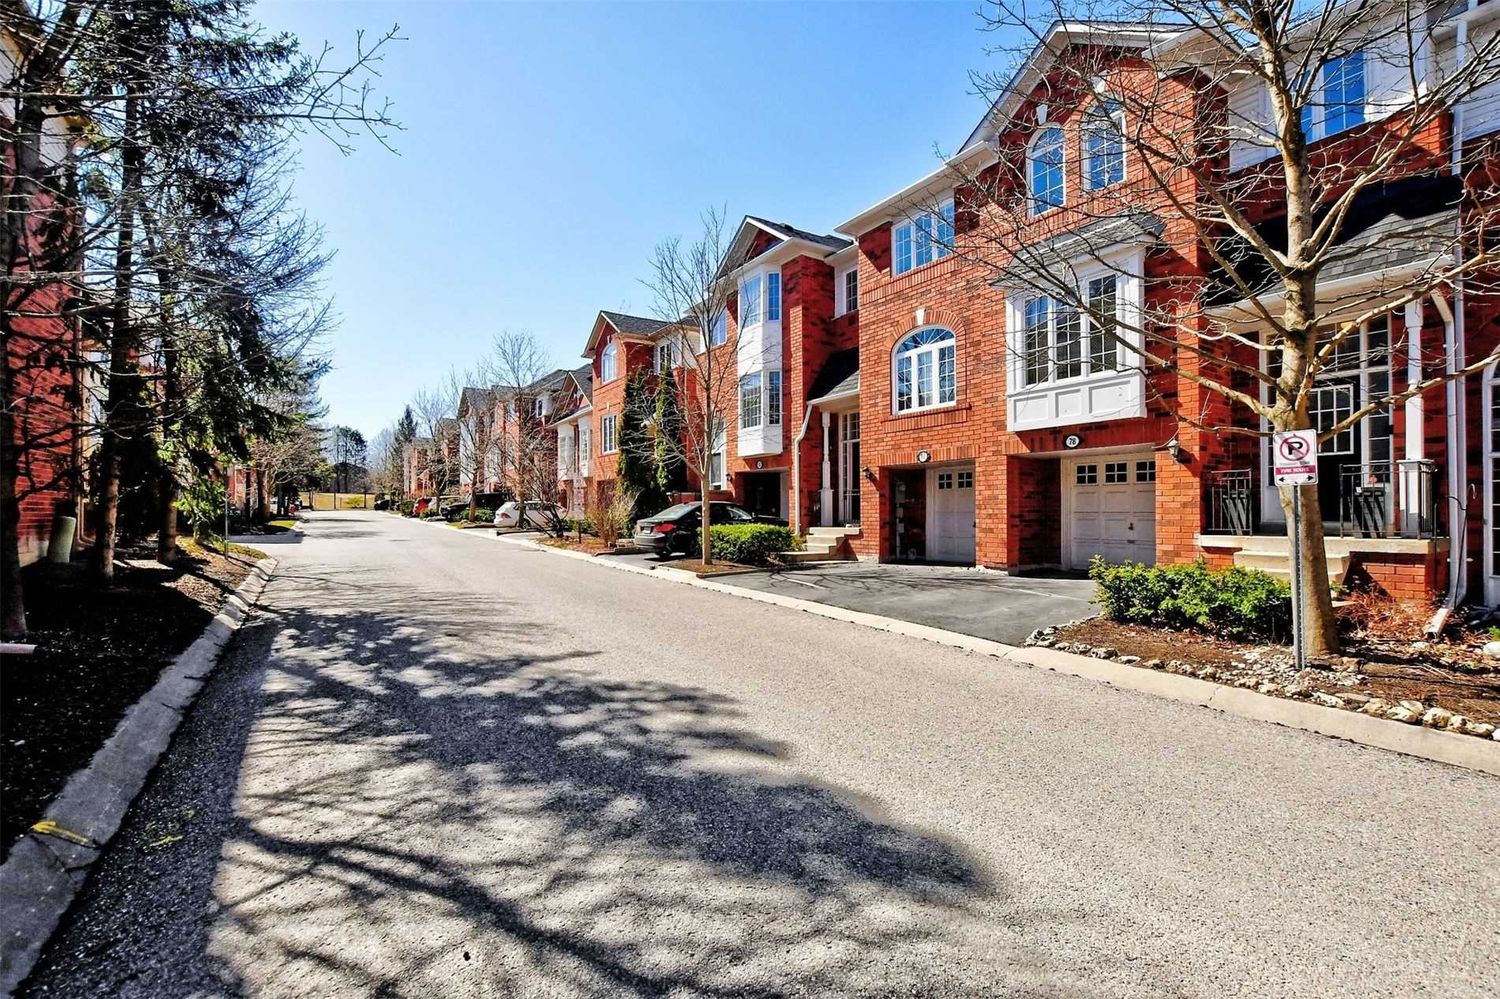 1-139 Mosaics Avenue. Mosaics Avenue Townhomes is located in  Aurora, Toronto - image #2 of 3